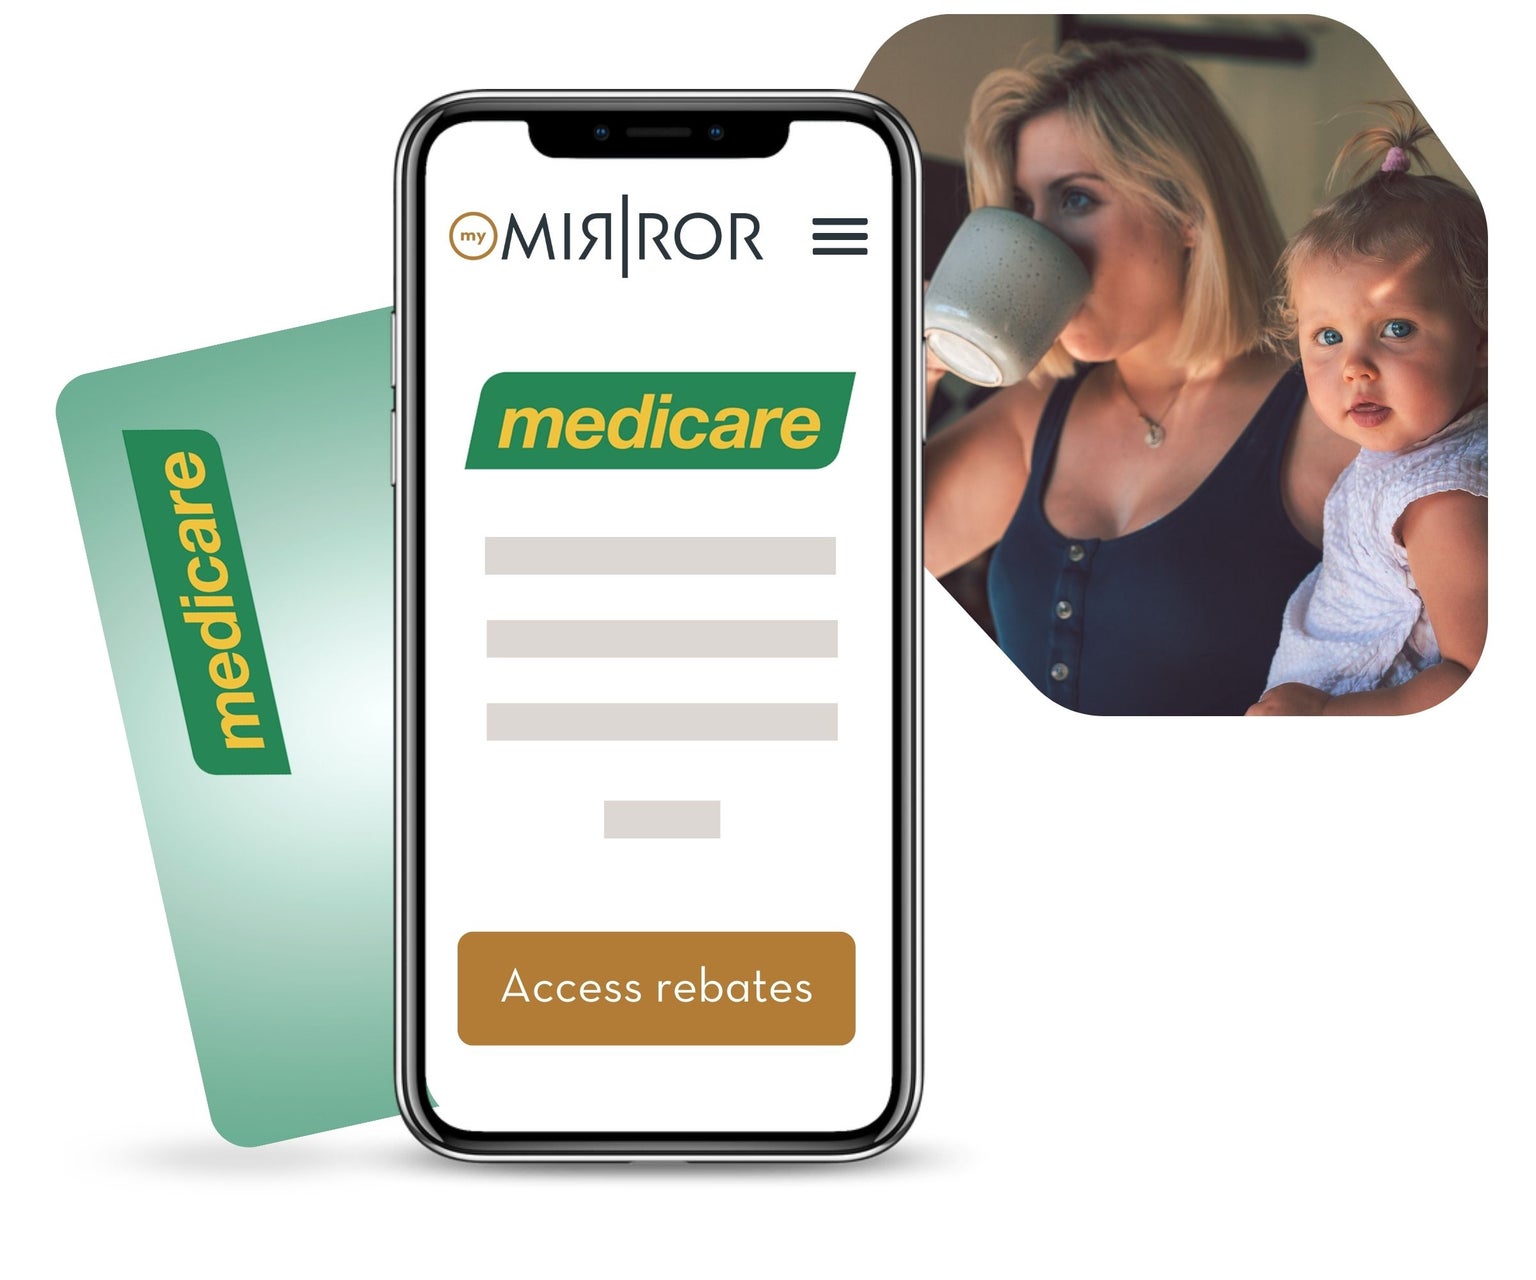 Medicare claims made easy